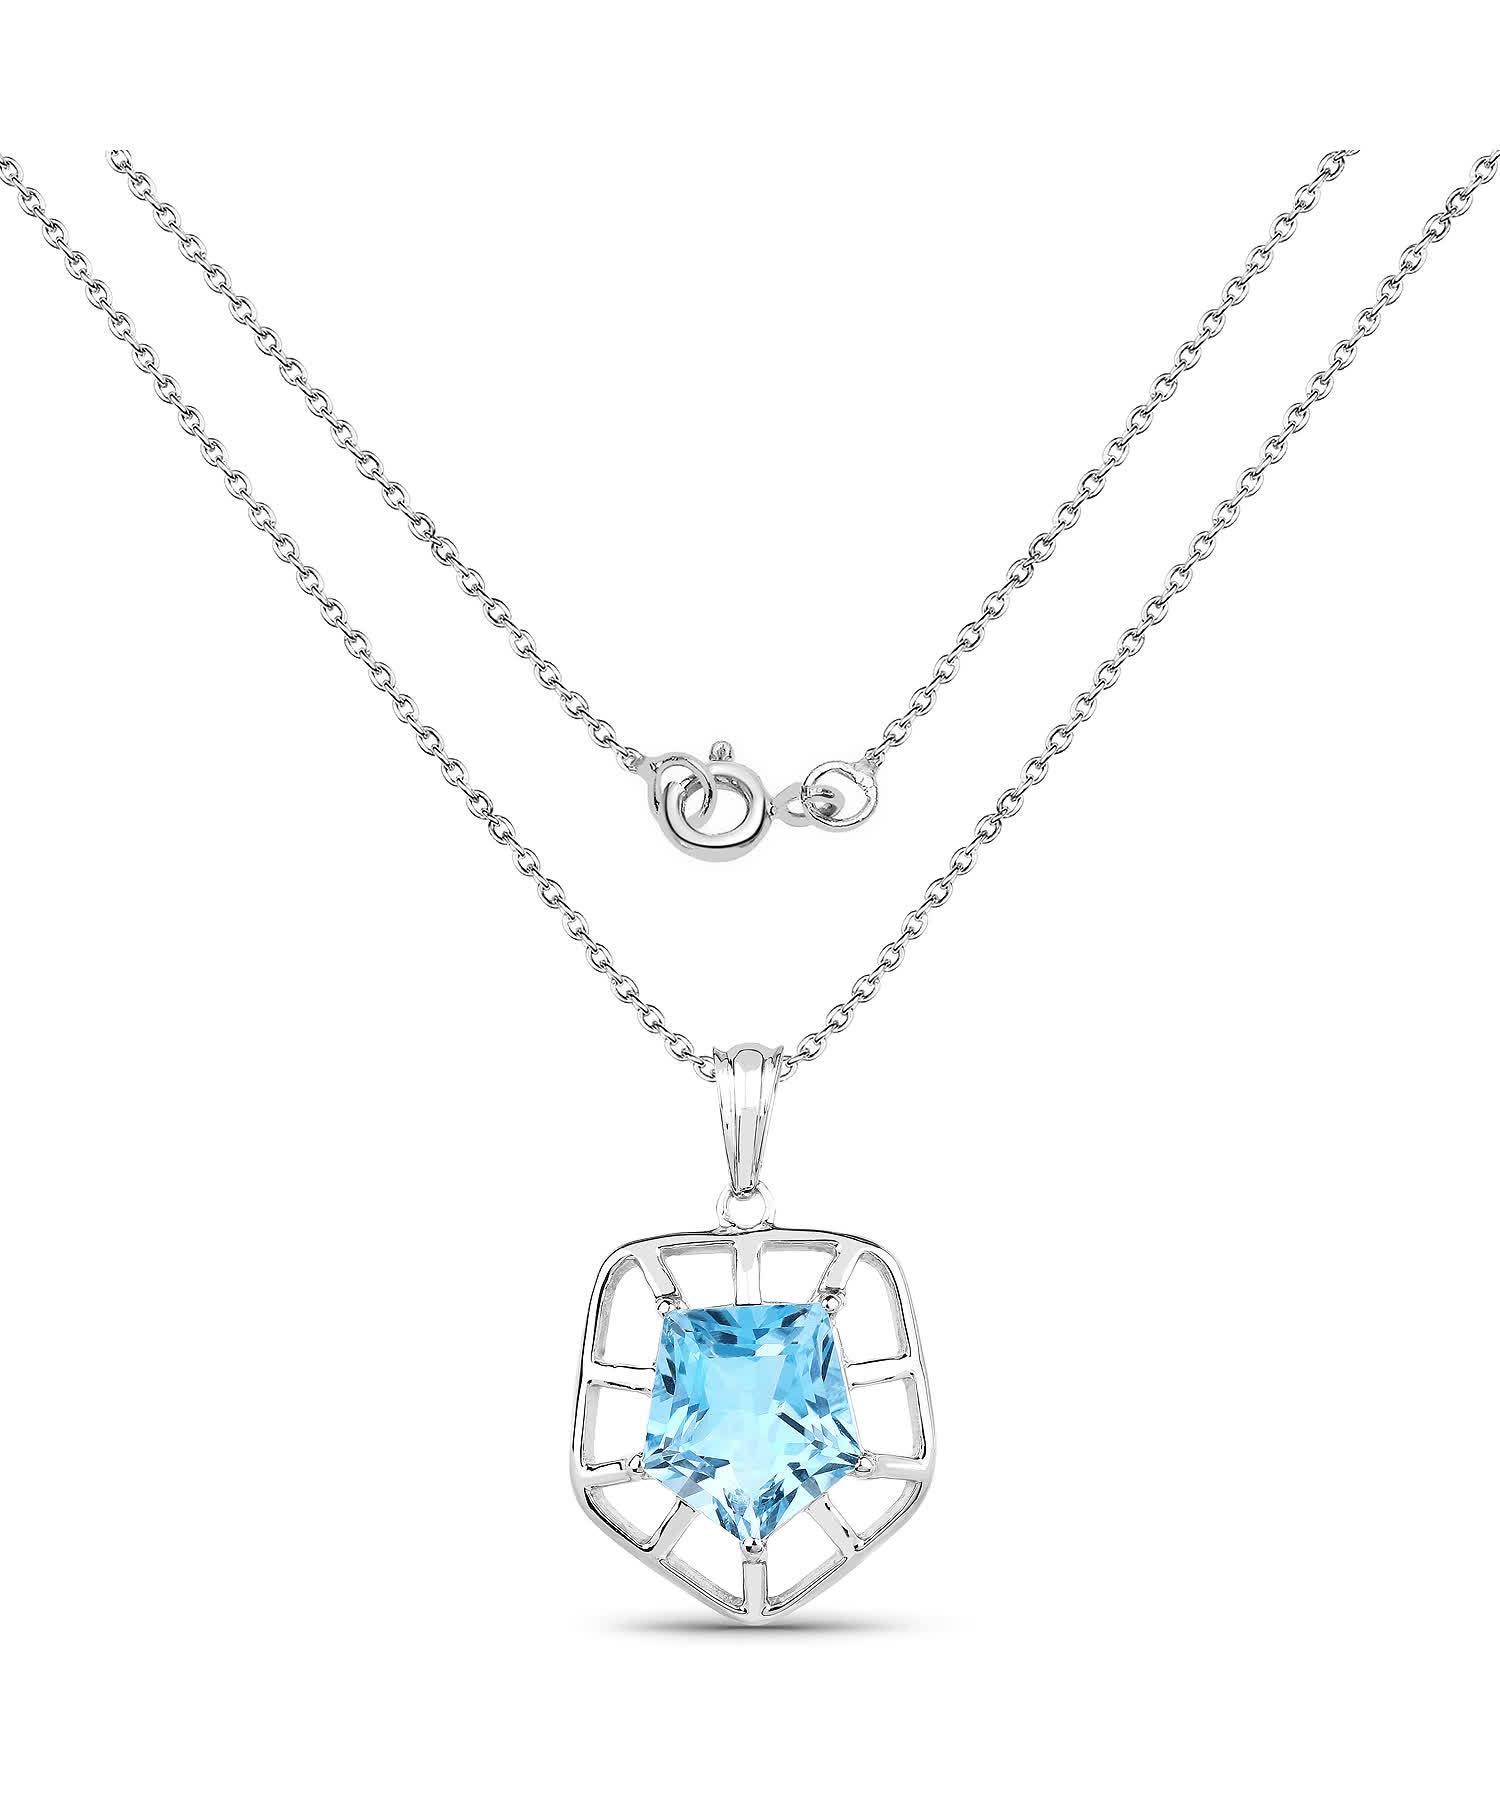 7.60ctw Natural Swiss Blue Topaz Rhodium Plated 925 Sterling Silver Pendant With Chain View 2